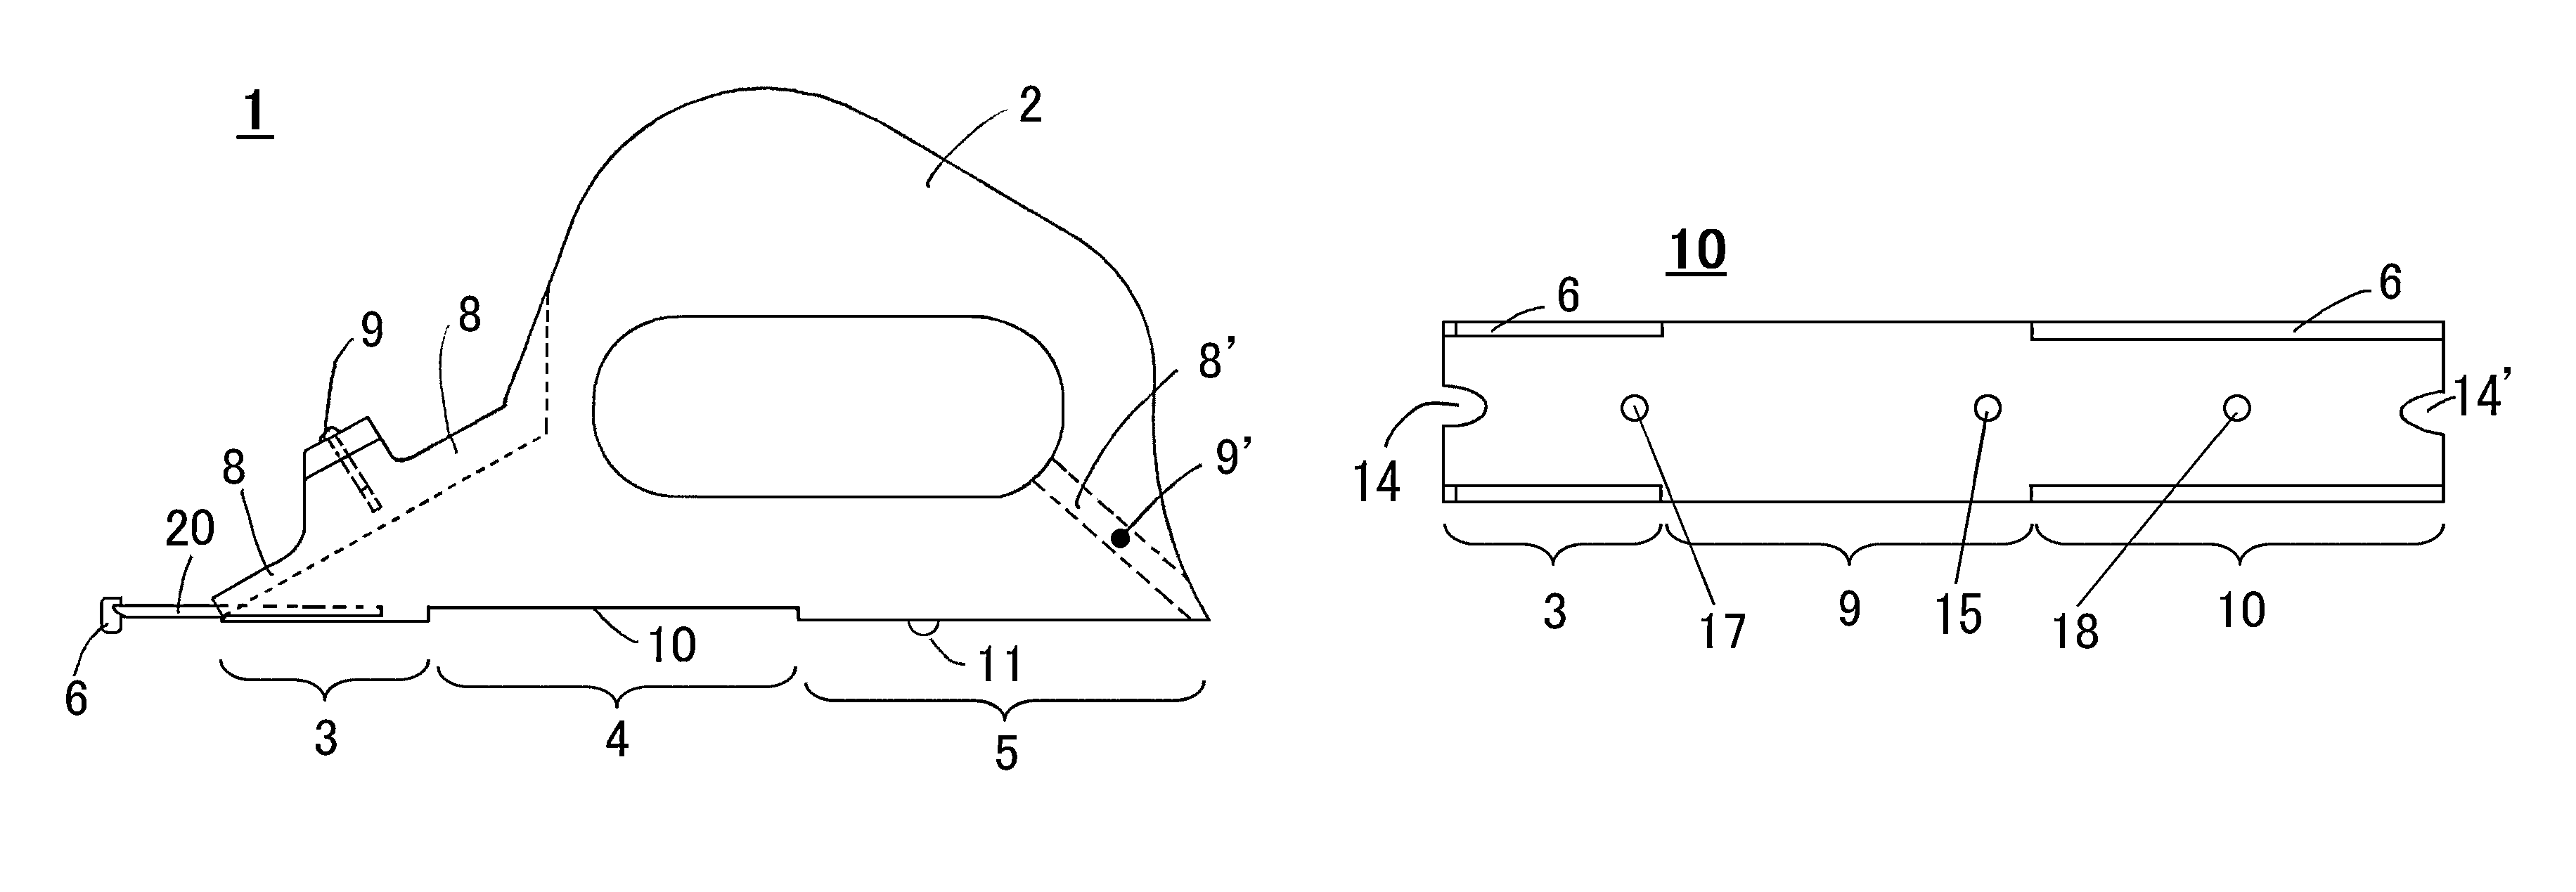 Sheet groove cutter capable of operation without use of ruler